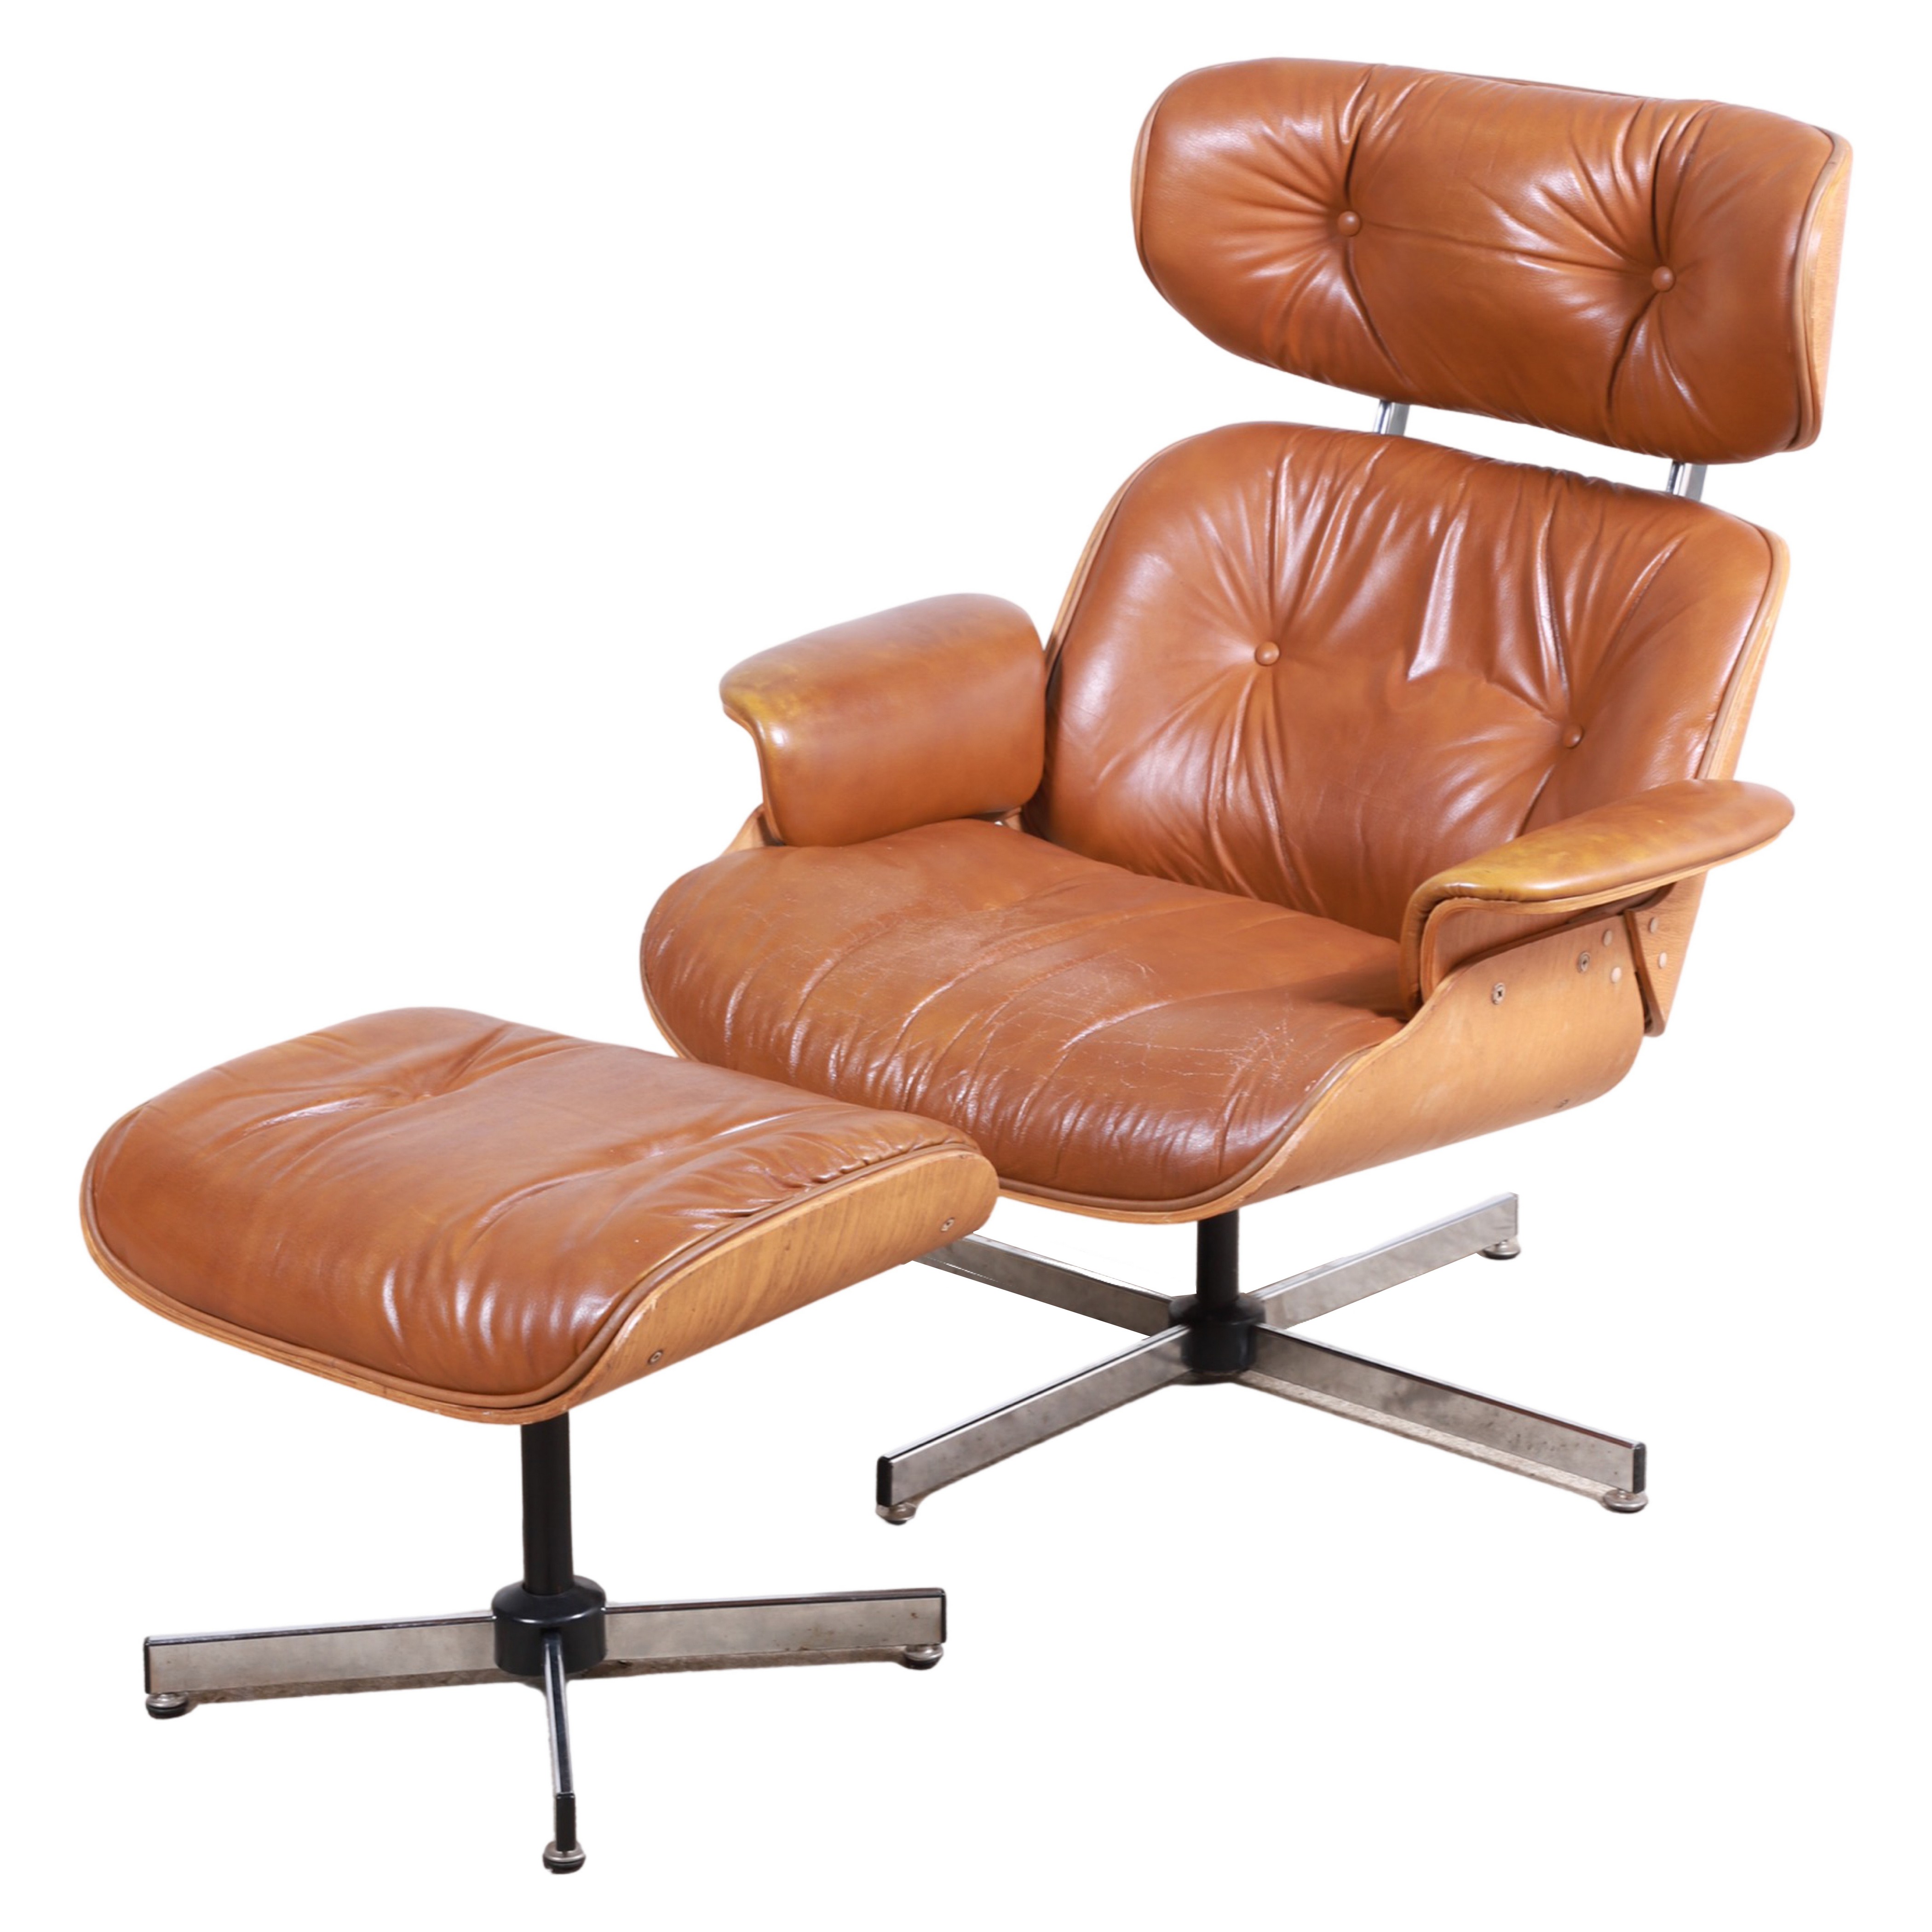 Eames style mahogany and leather 3b4489